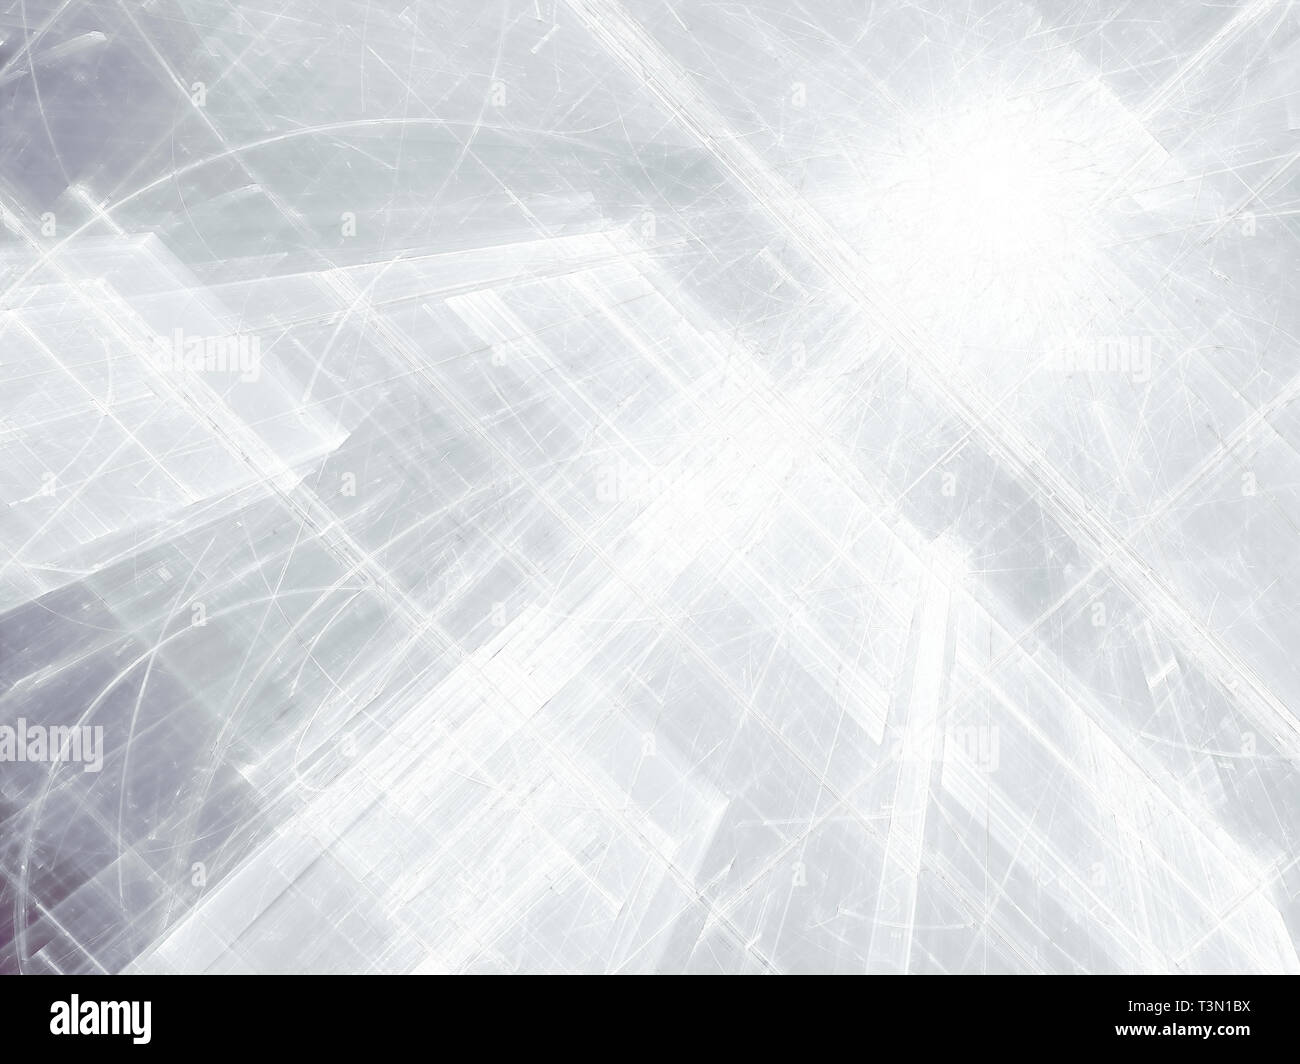 Abstract white tech style background - digitally generated image Stock Photo